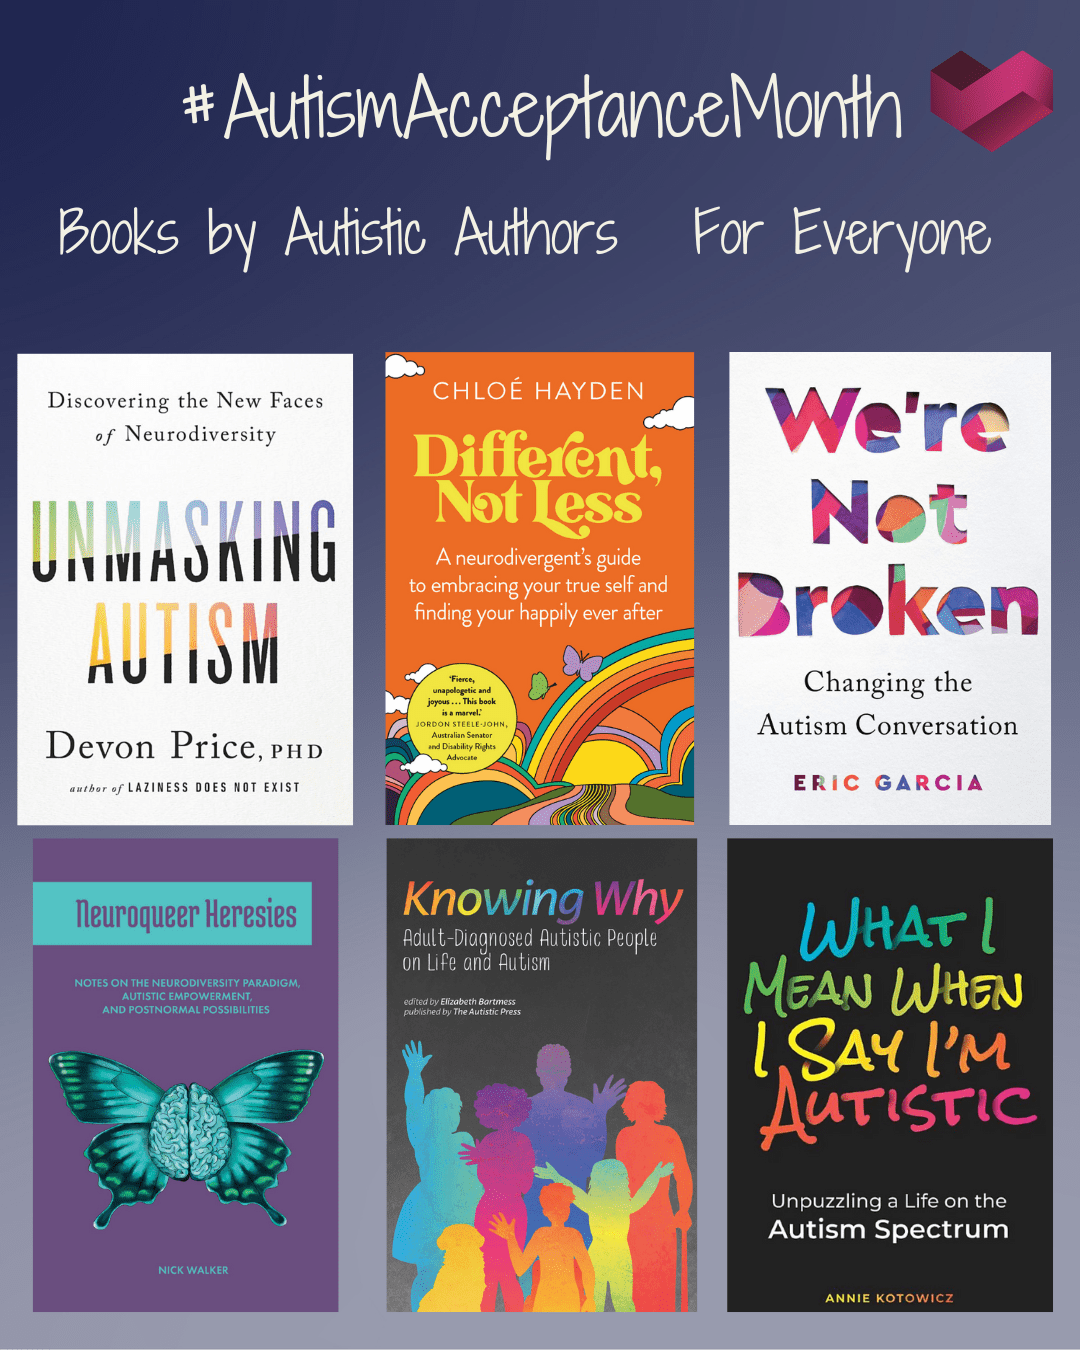 Books by Autistic Authors for Everyone Unmasking Autism by Devon Price Different, Not Less by Chloe Hayden We're Not Broken by Eric Garcia Neuroqueer Heresies by Nick Walker Knowing Why: Adult-diagnosed autistic people on life and autism by Elizabeth Bartmess What I Mean When I Say I'm Autistic by Annie Kotowicz